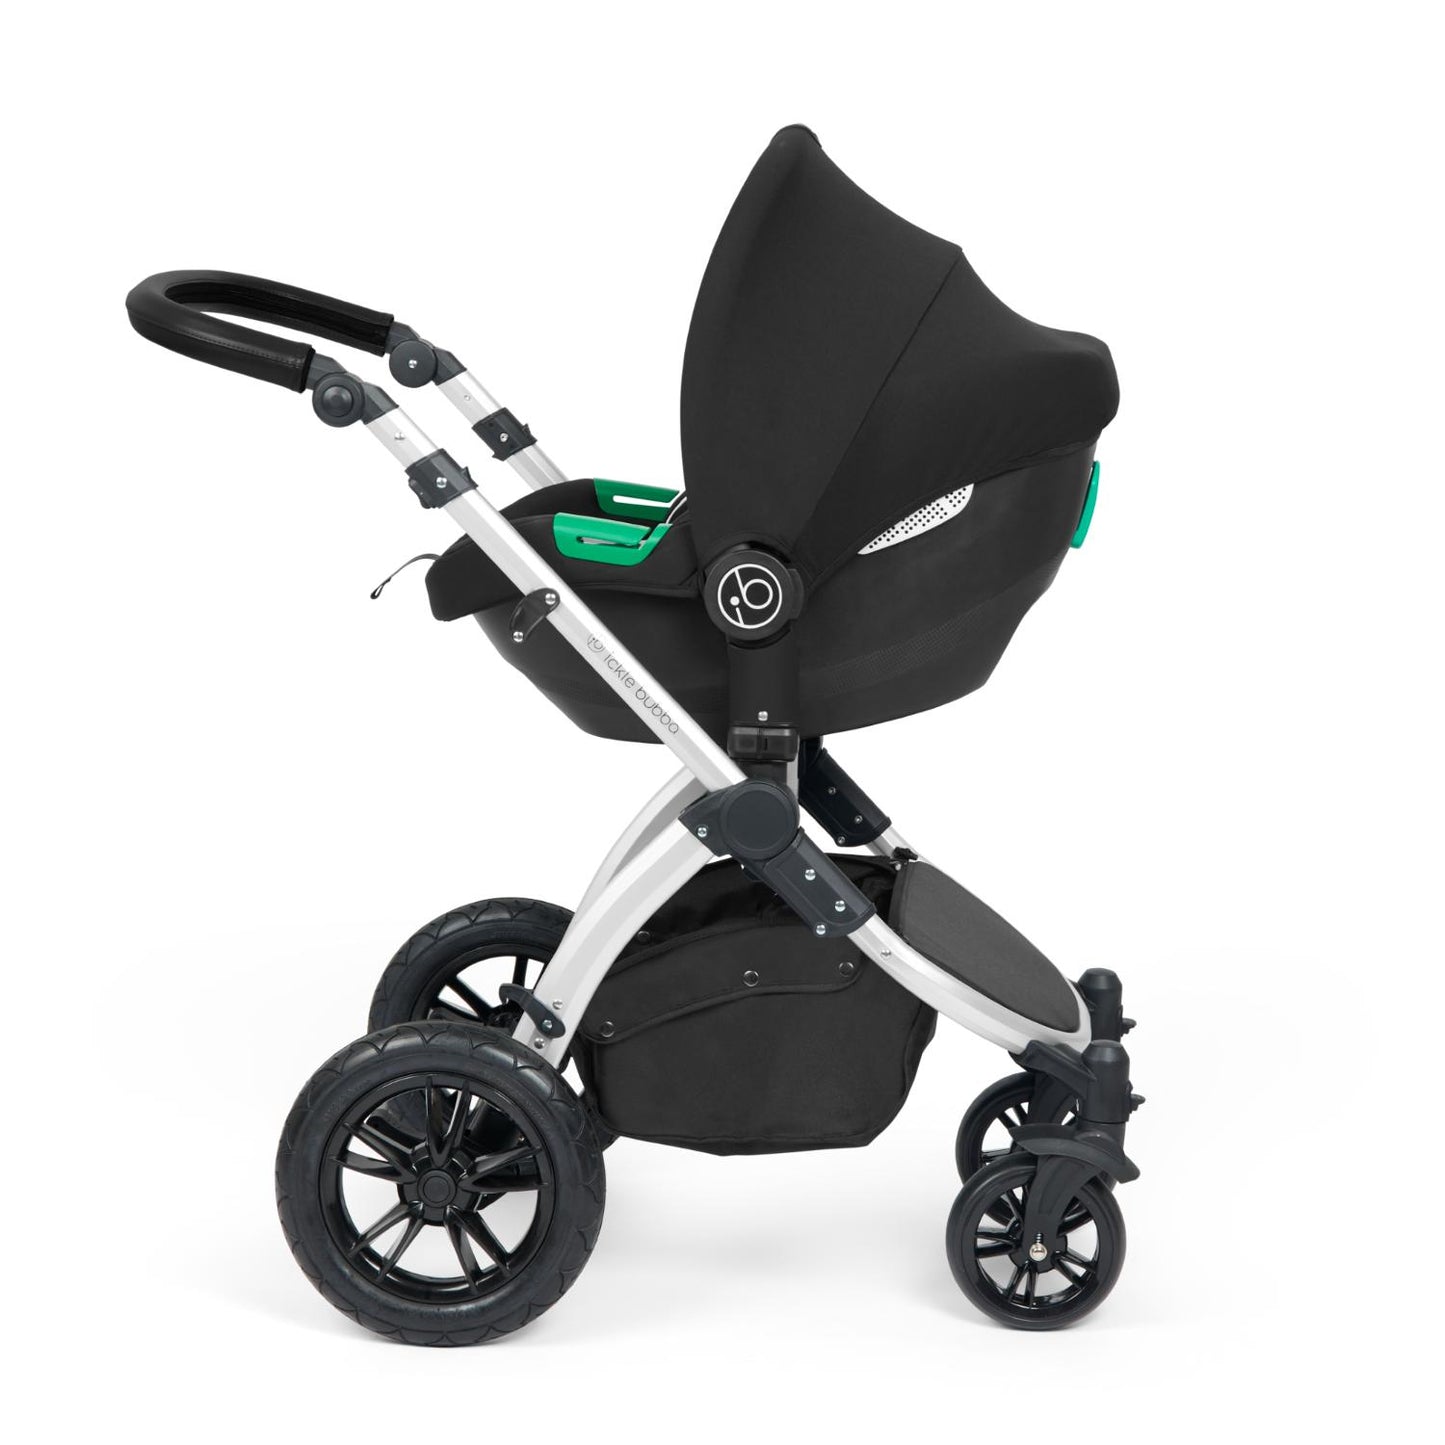 Ickle Bubba Stomp Luxe Pushchair with Cirrus i-Size car seat attached in Charcoal Grey colour with silver chassis